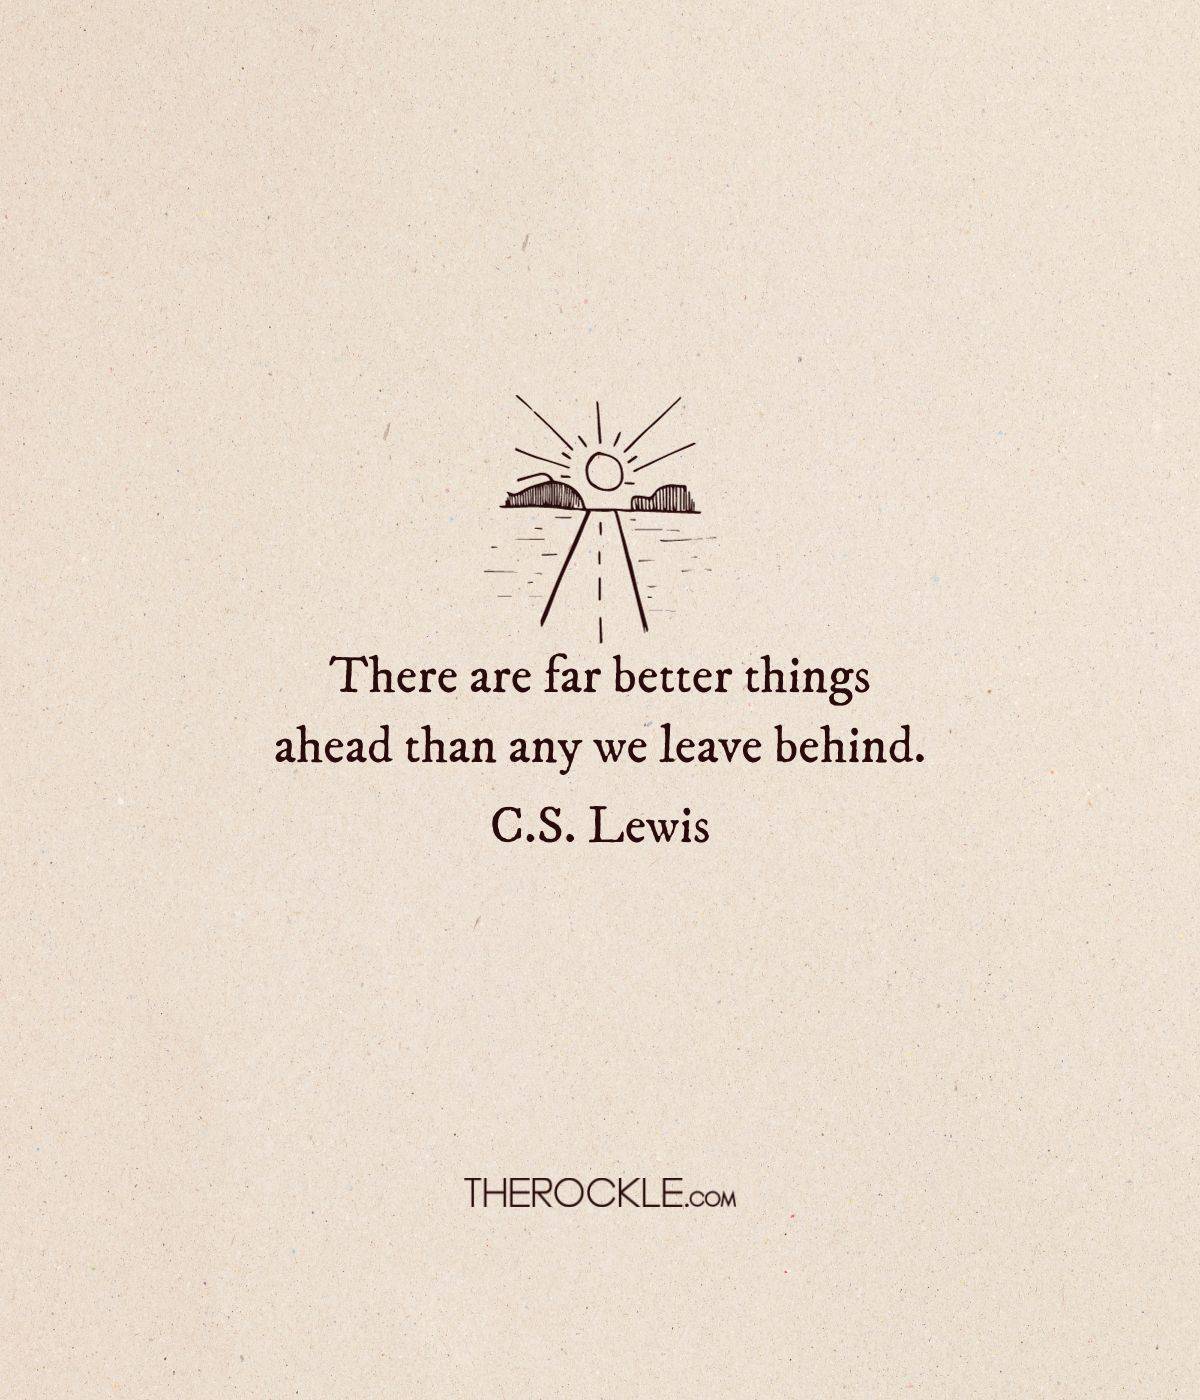 C.S. Lewis' quote about new beginnings